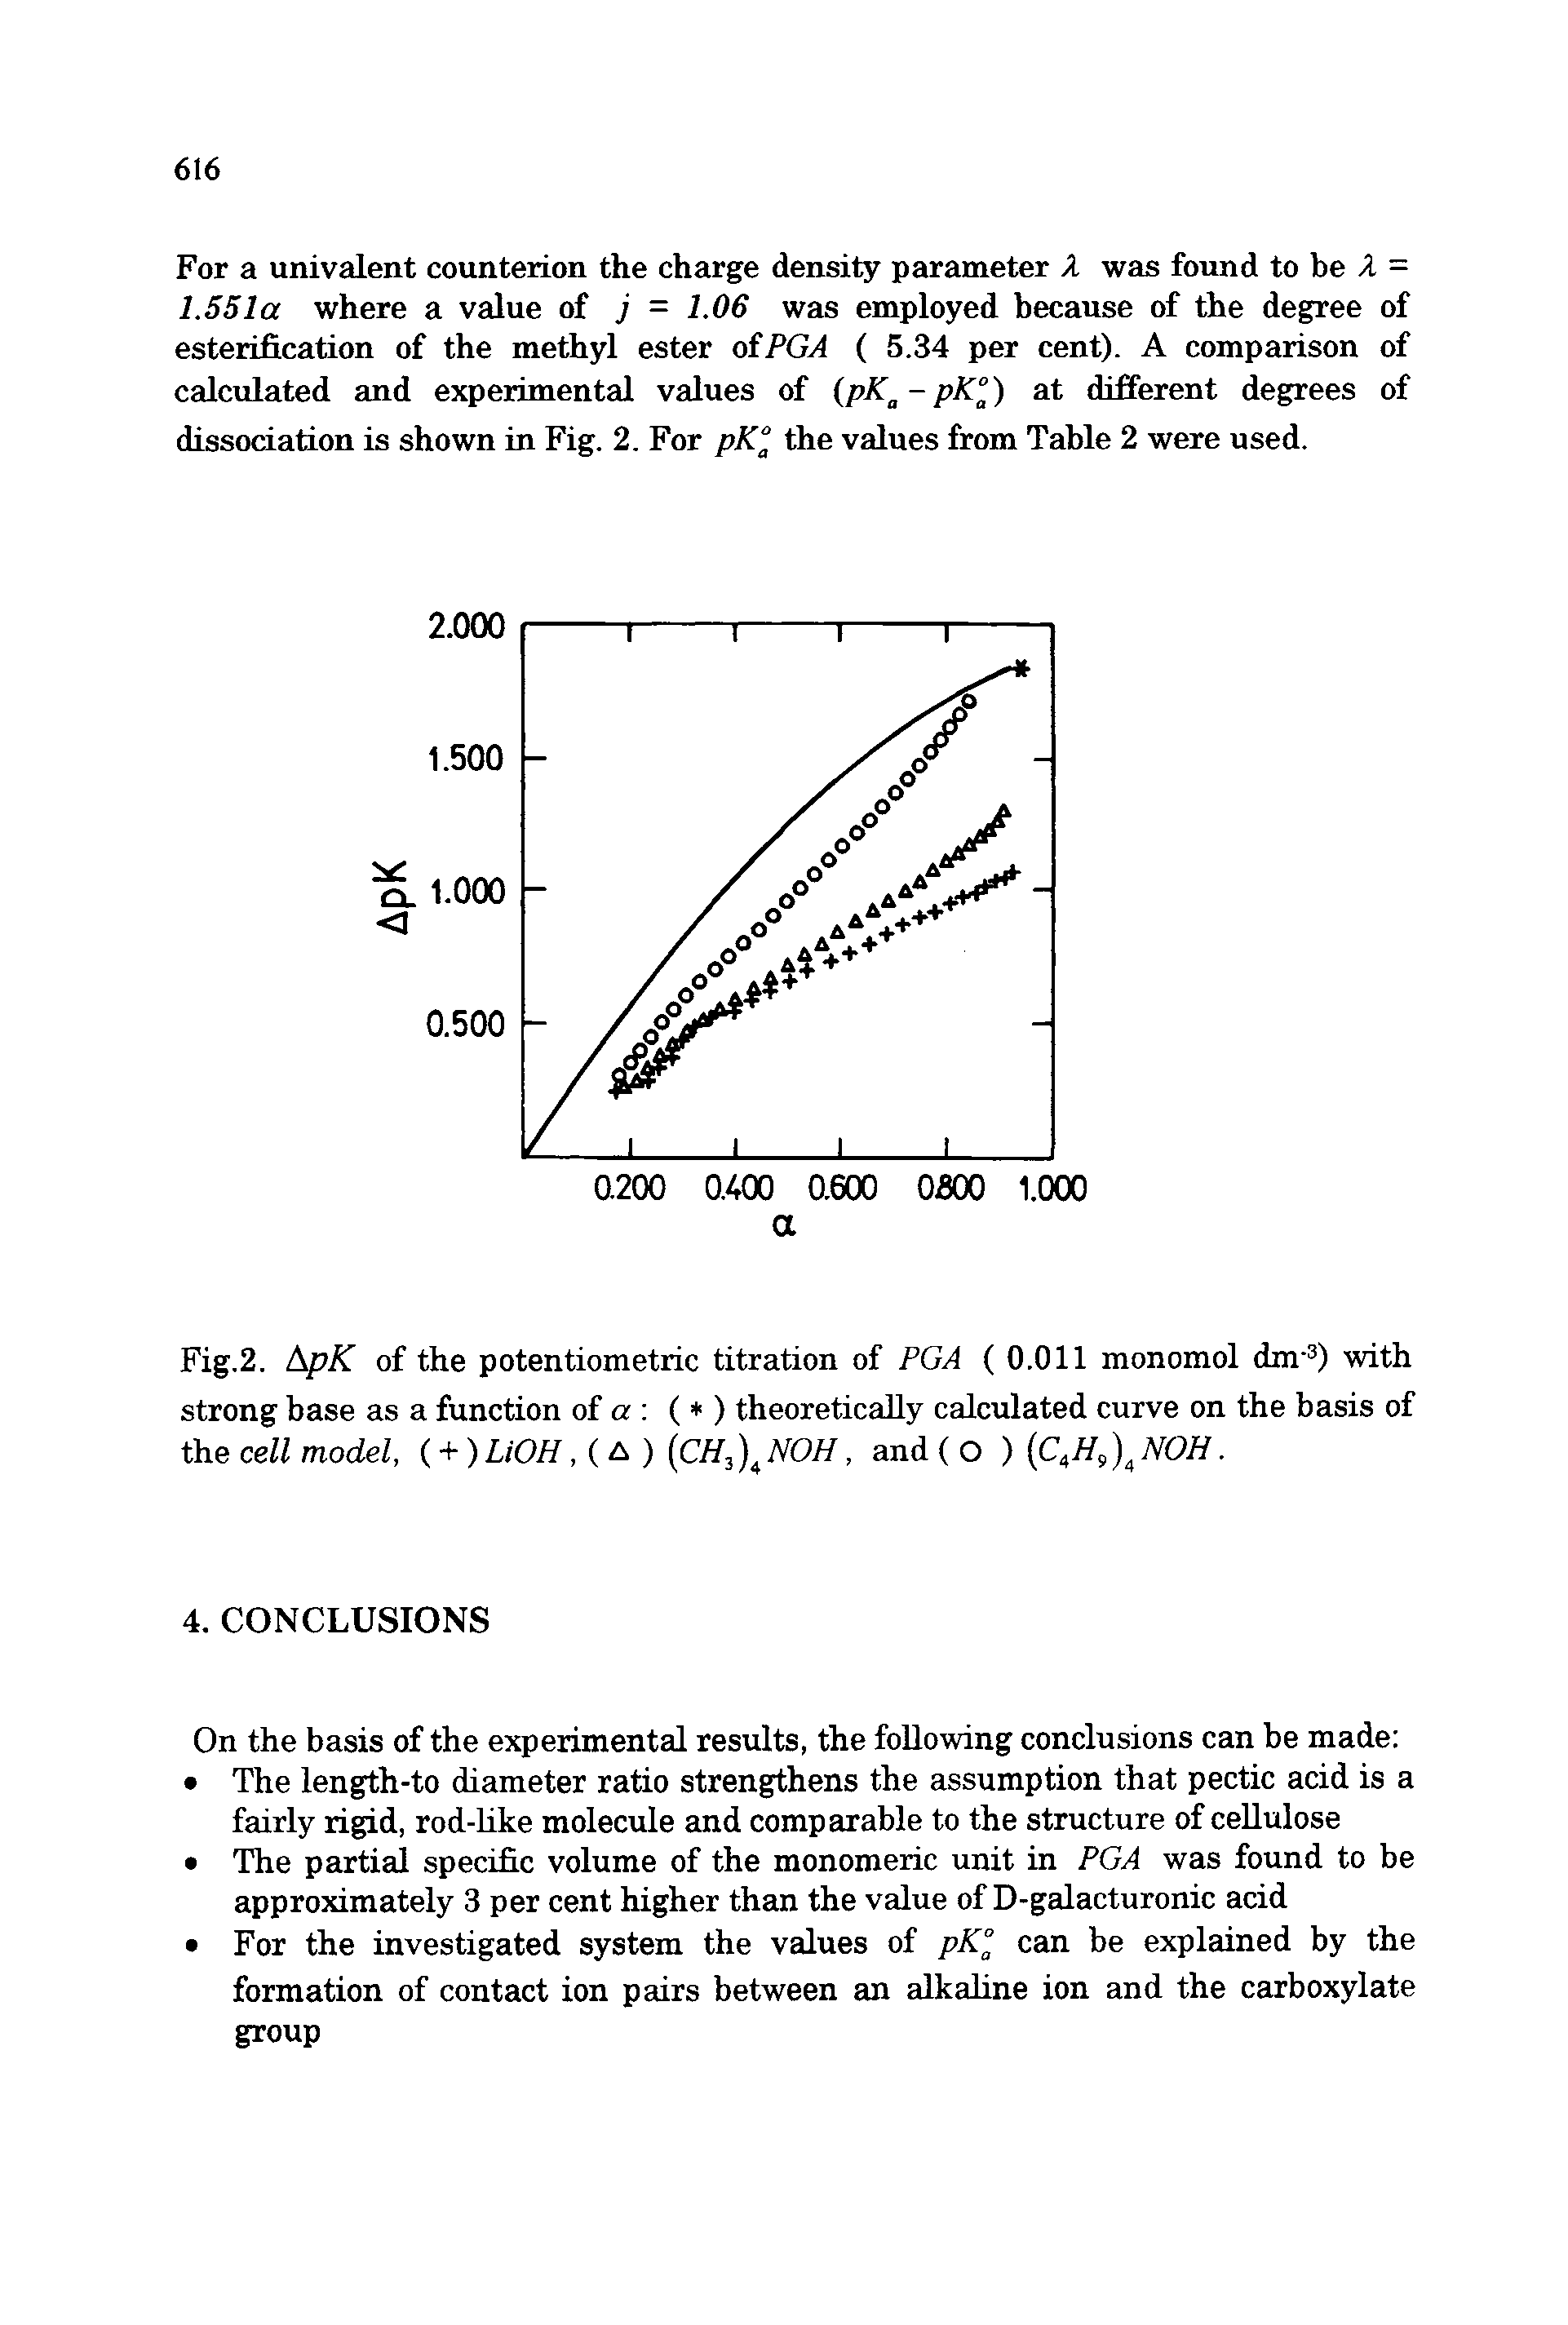 Fig.2. ApAT of the potentiometric titration of PGA ( 0.011 monomol dm ) with strong base as a function of a ( ) theoretically calculated curve on the basis of the cell model, (+) LiOH, ( a ) (C//3 NOH, and ( O ) C H NOH.